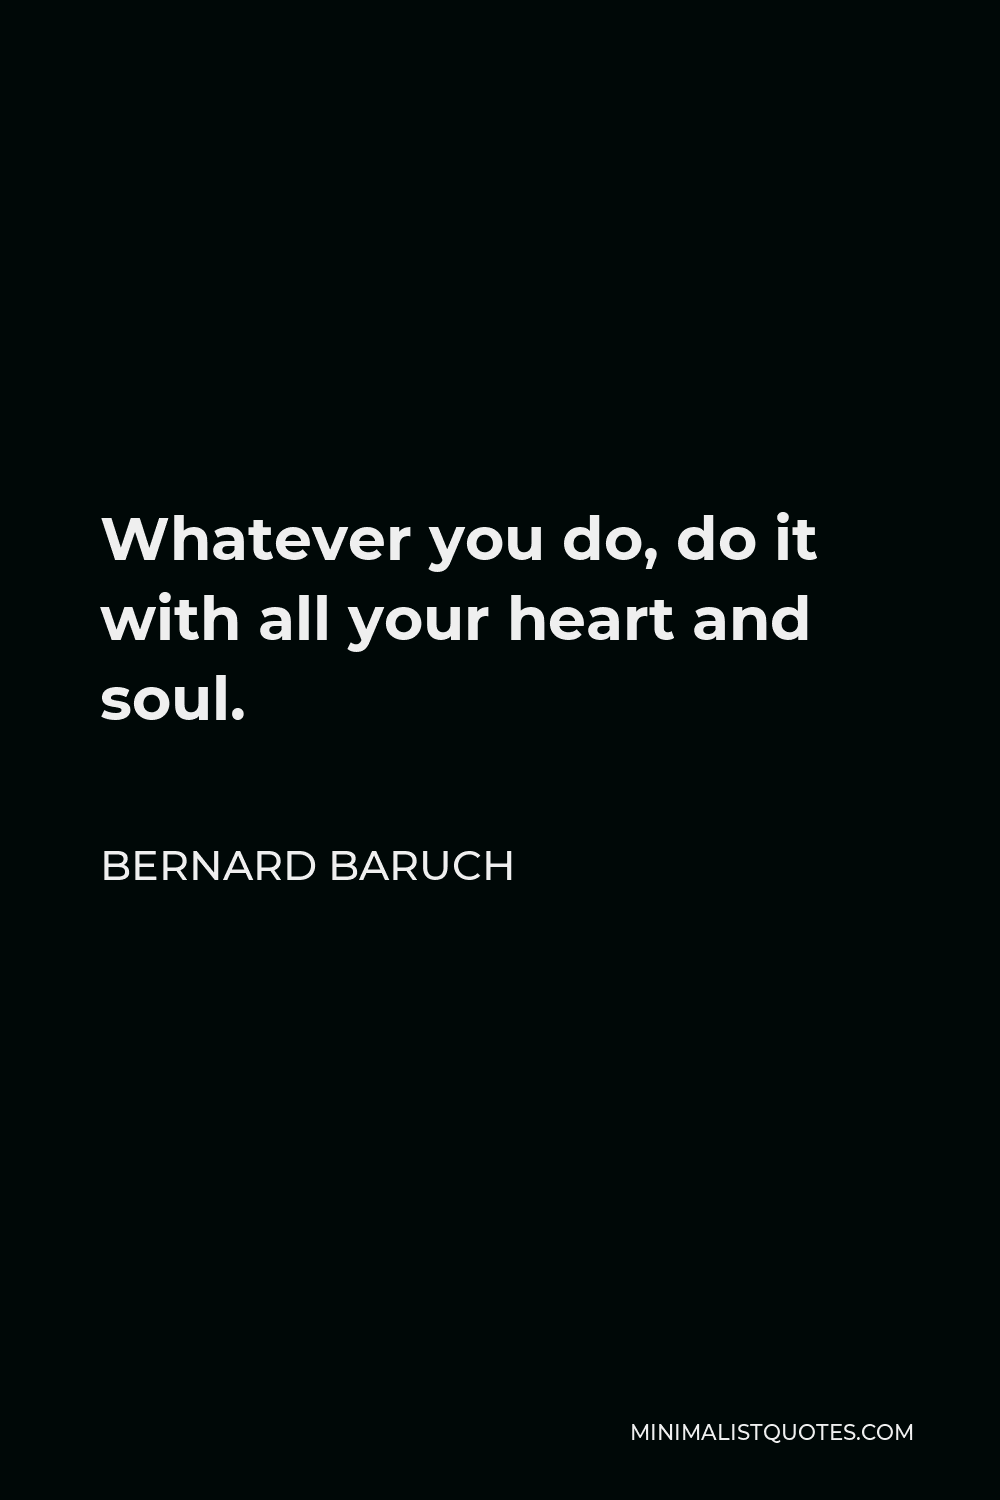 Bernard Baruch Quote - Whatever you do, do it with all your heart and soul.